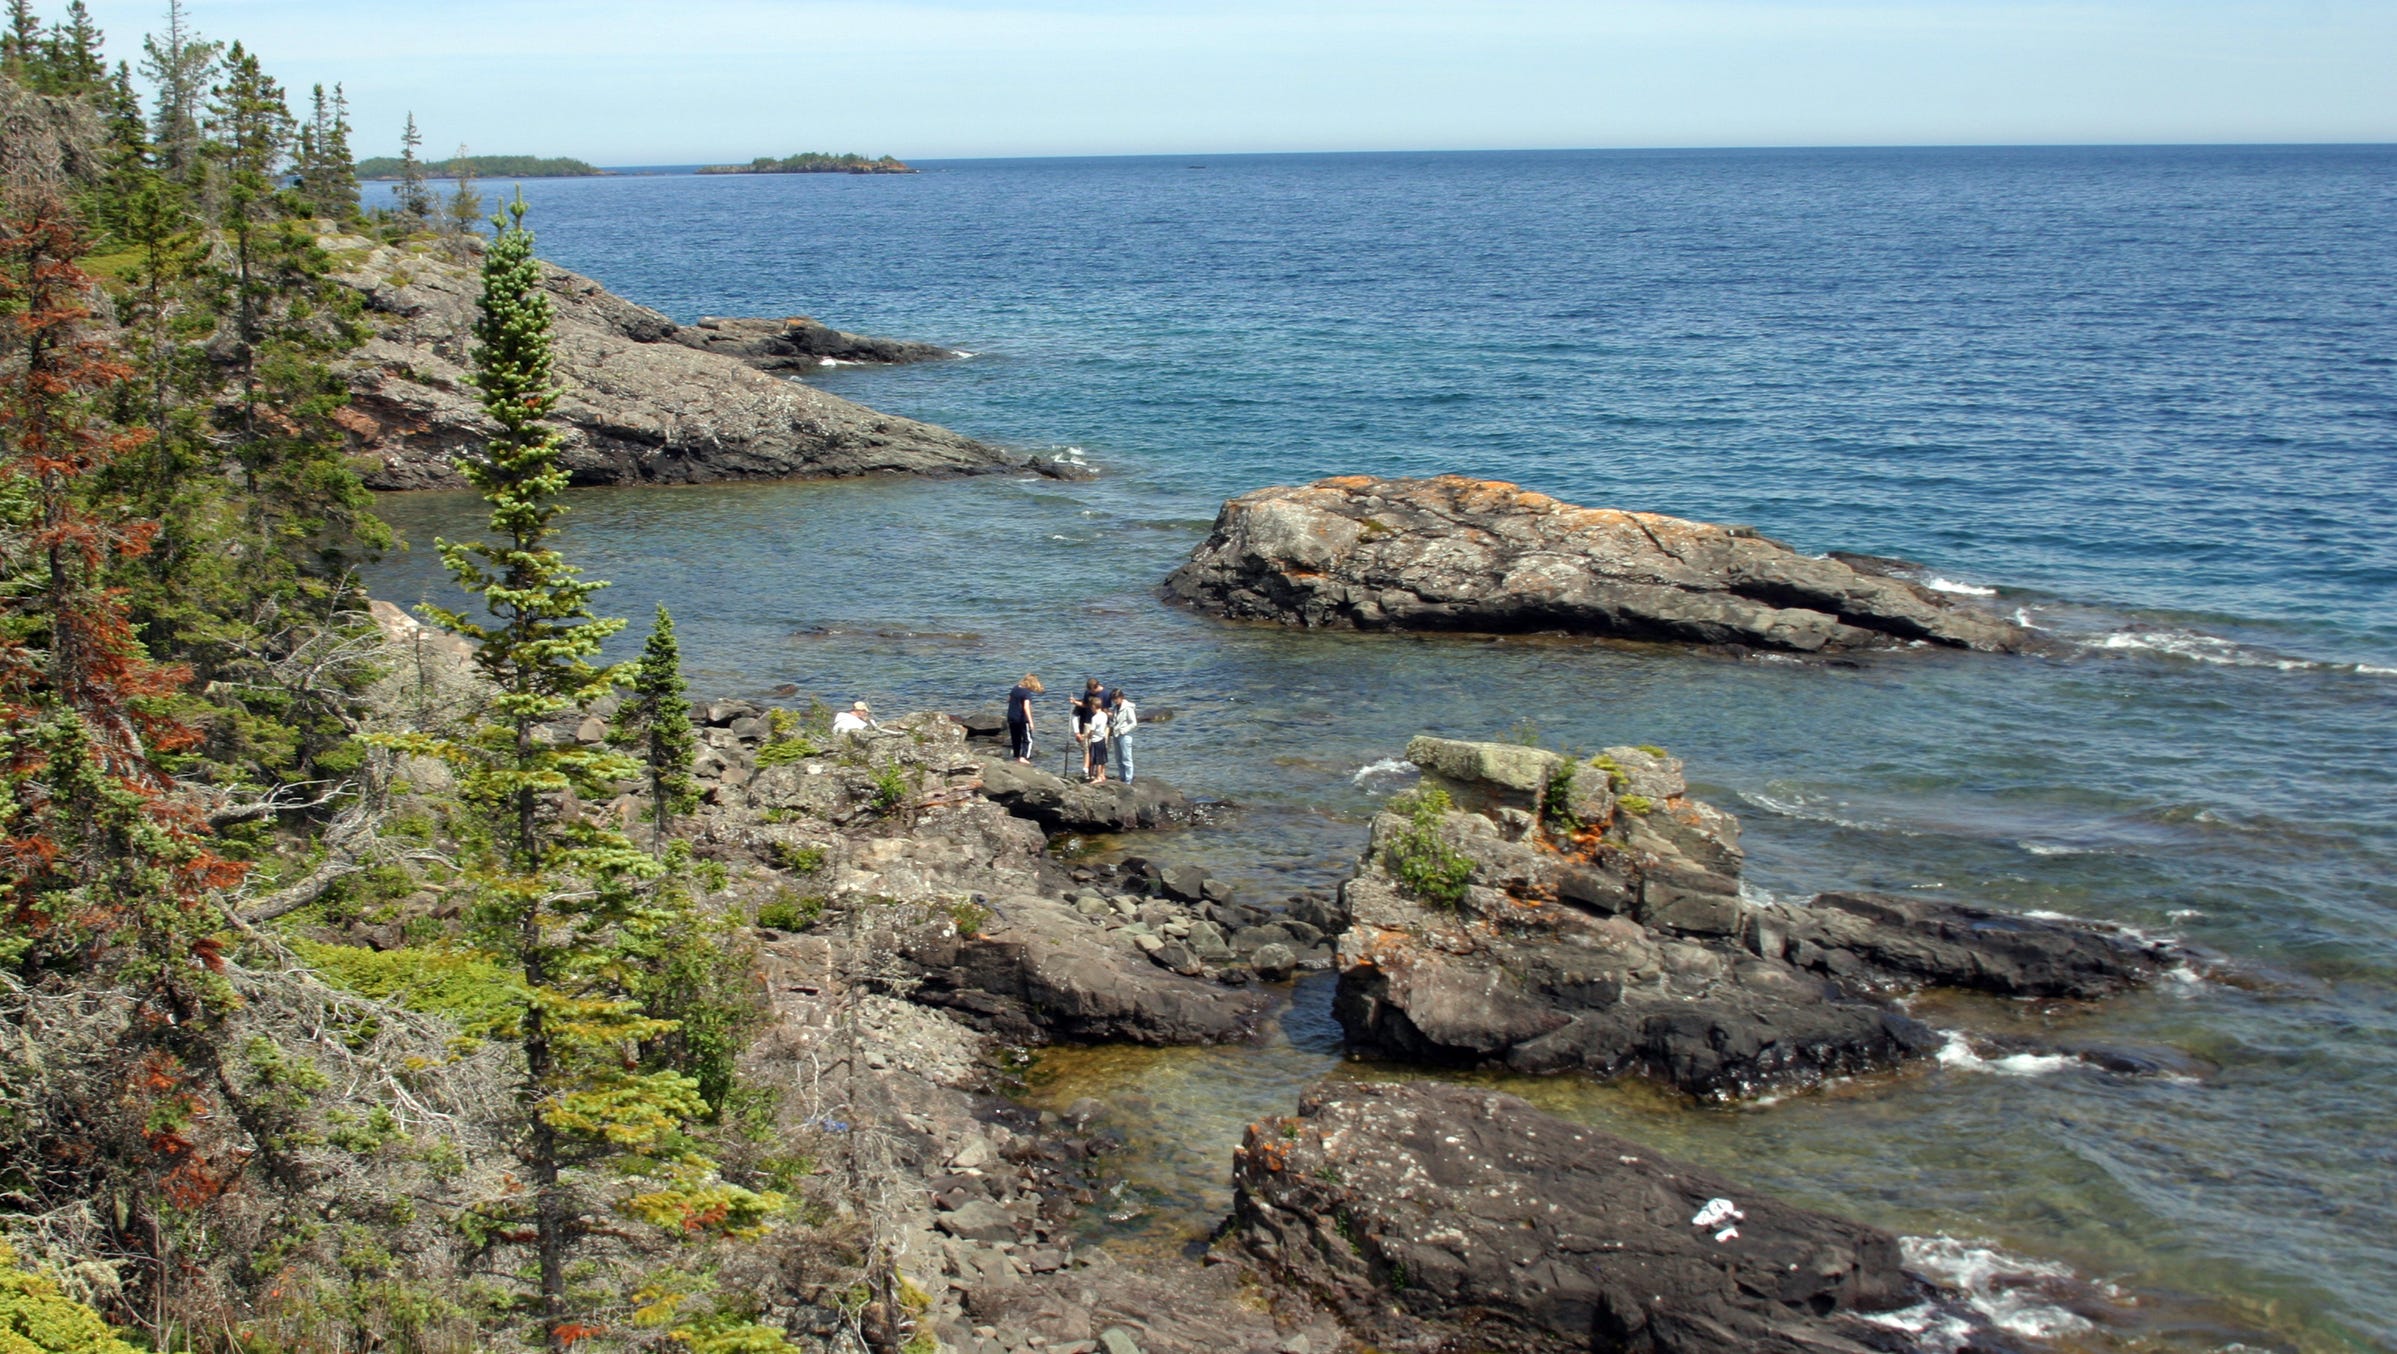 Where's the love? Isle Royale among least-visited national parks